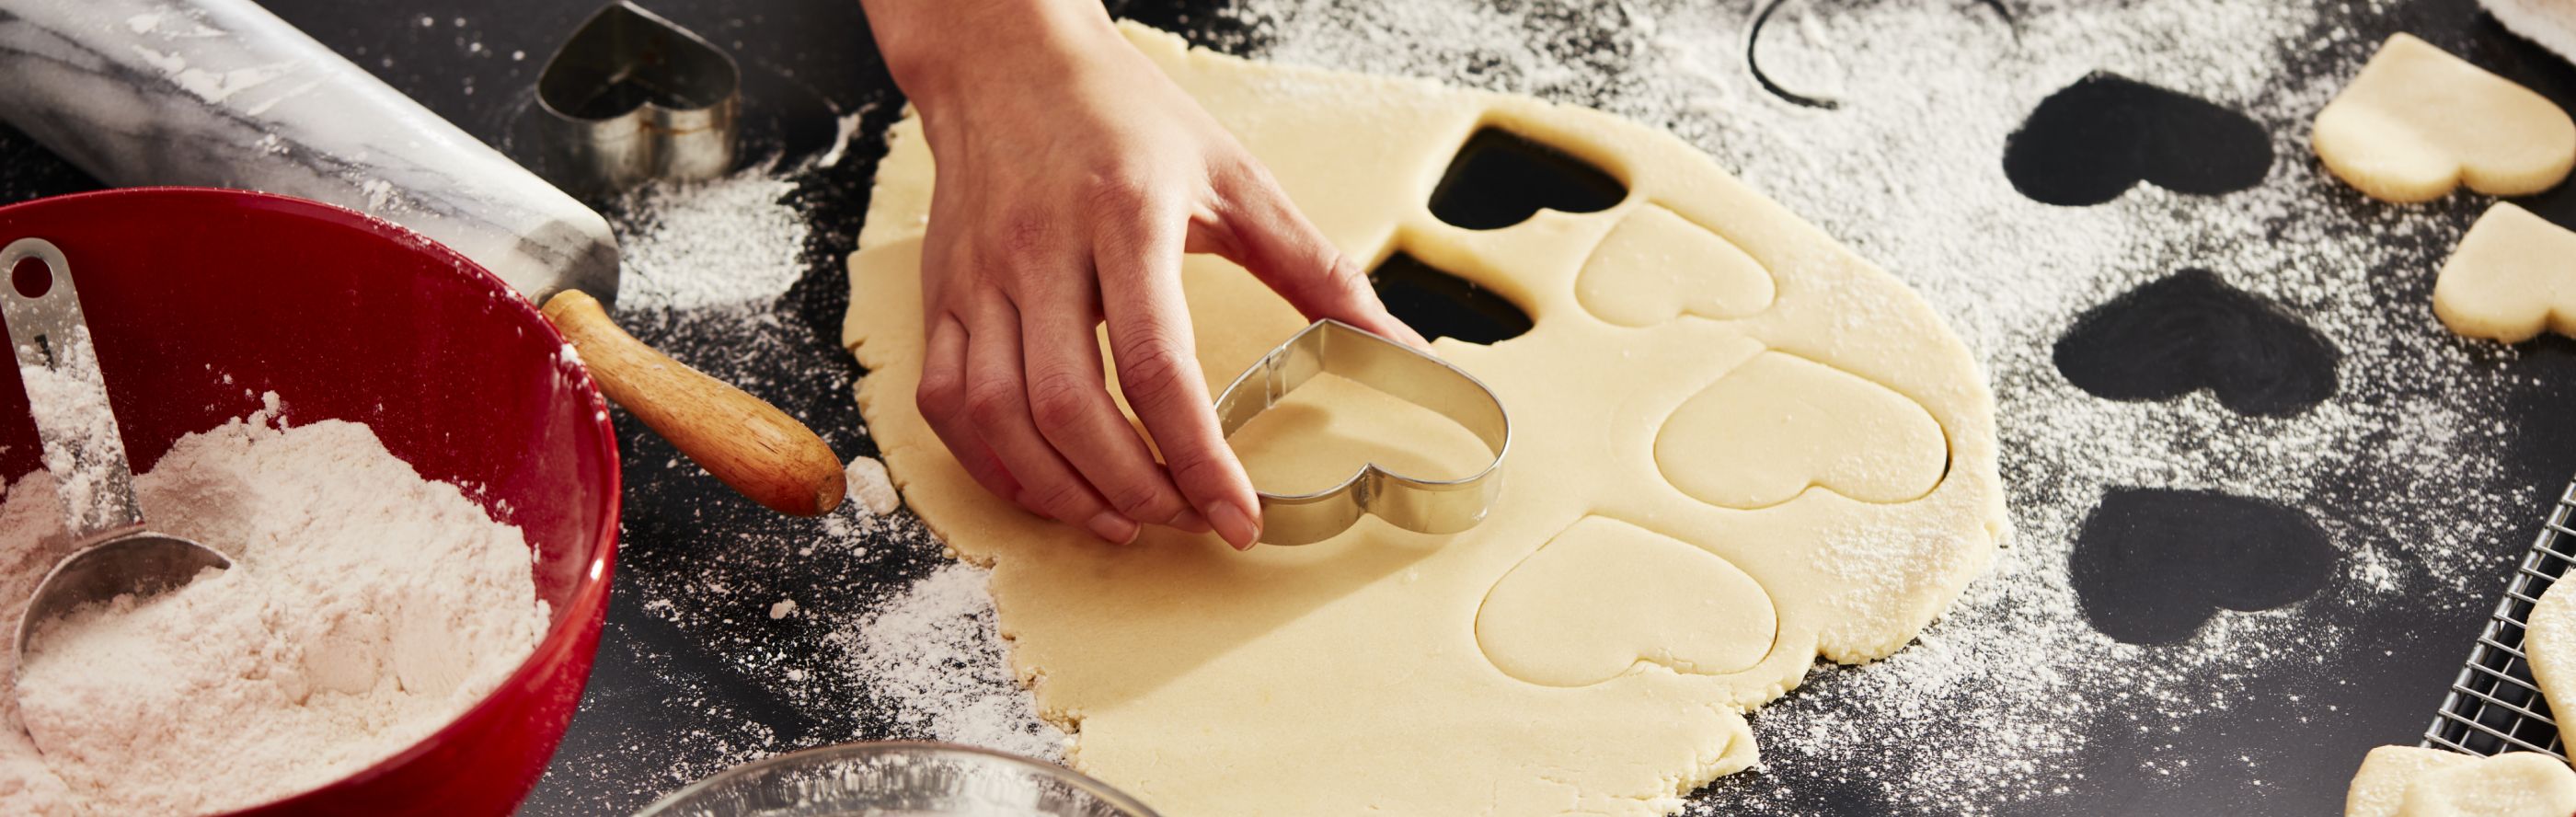 A piece of dough being pressed with a cookie cutter, surrounded by other baking instruments